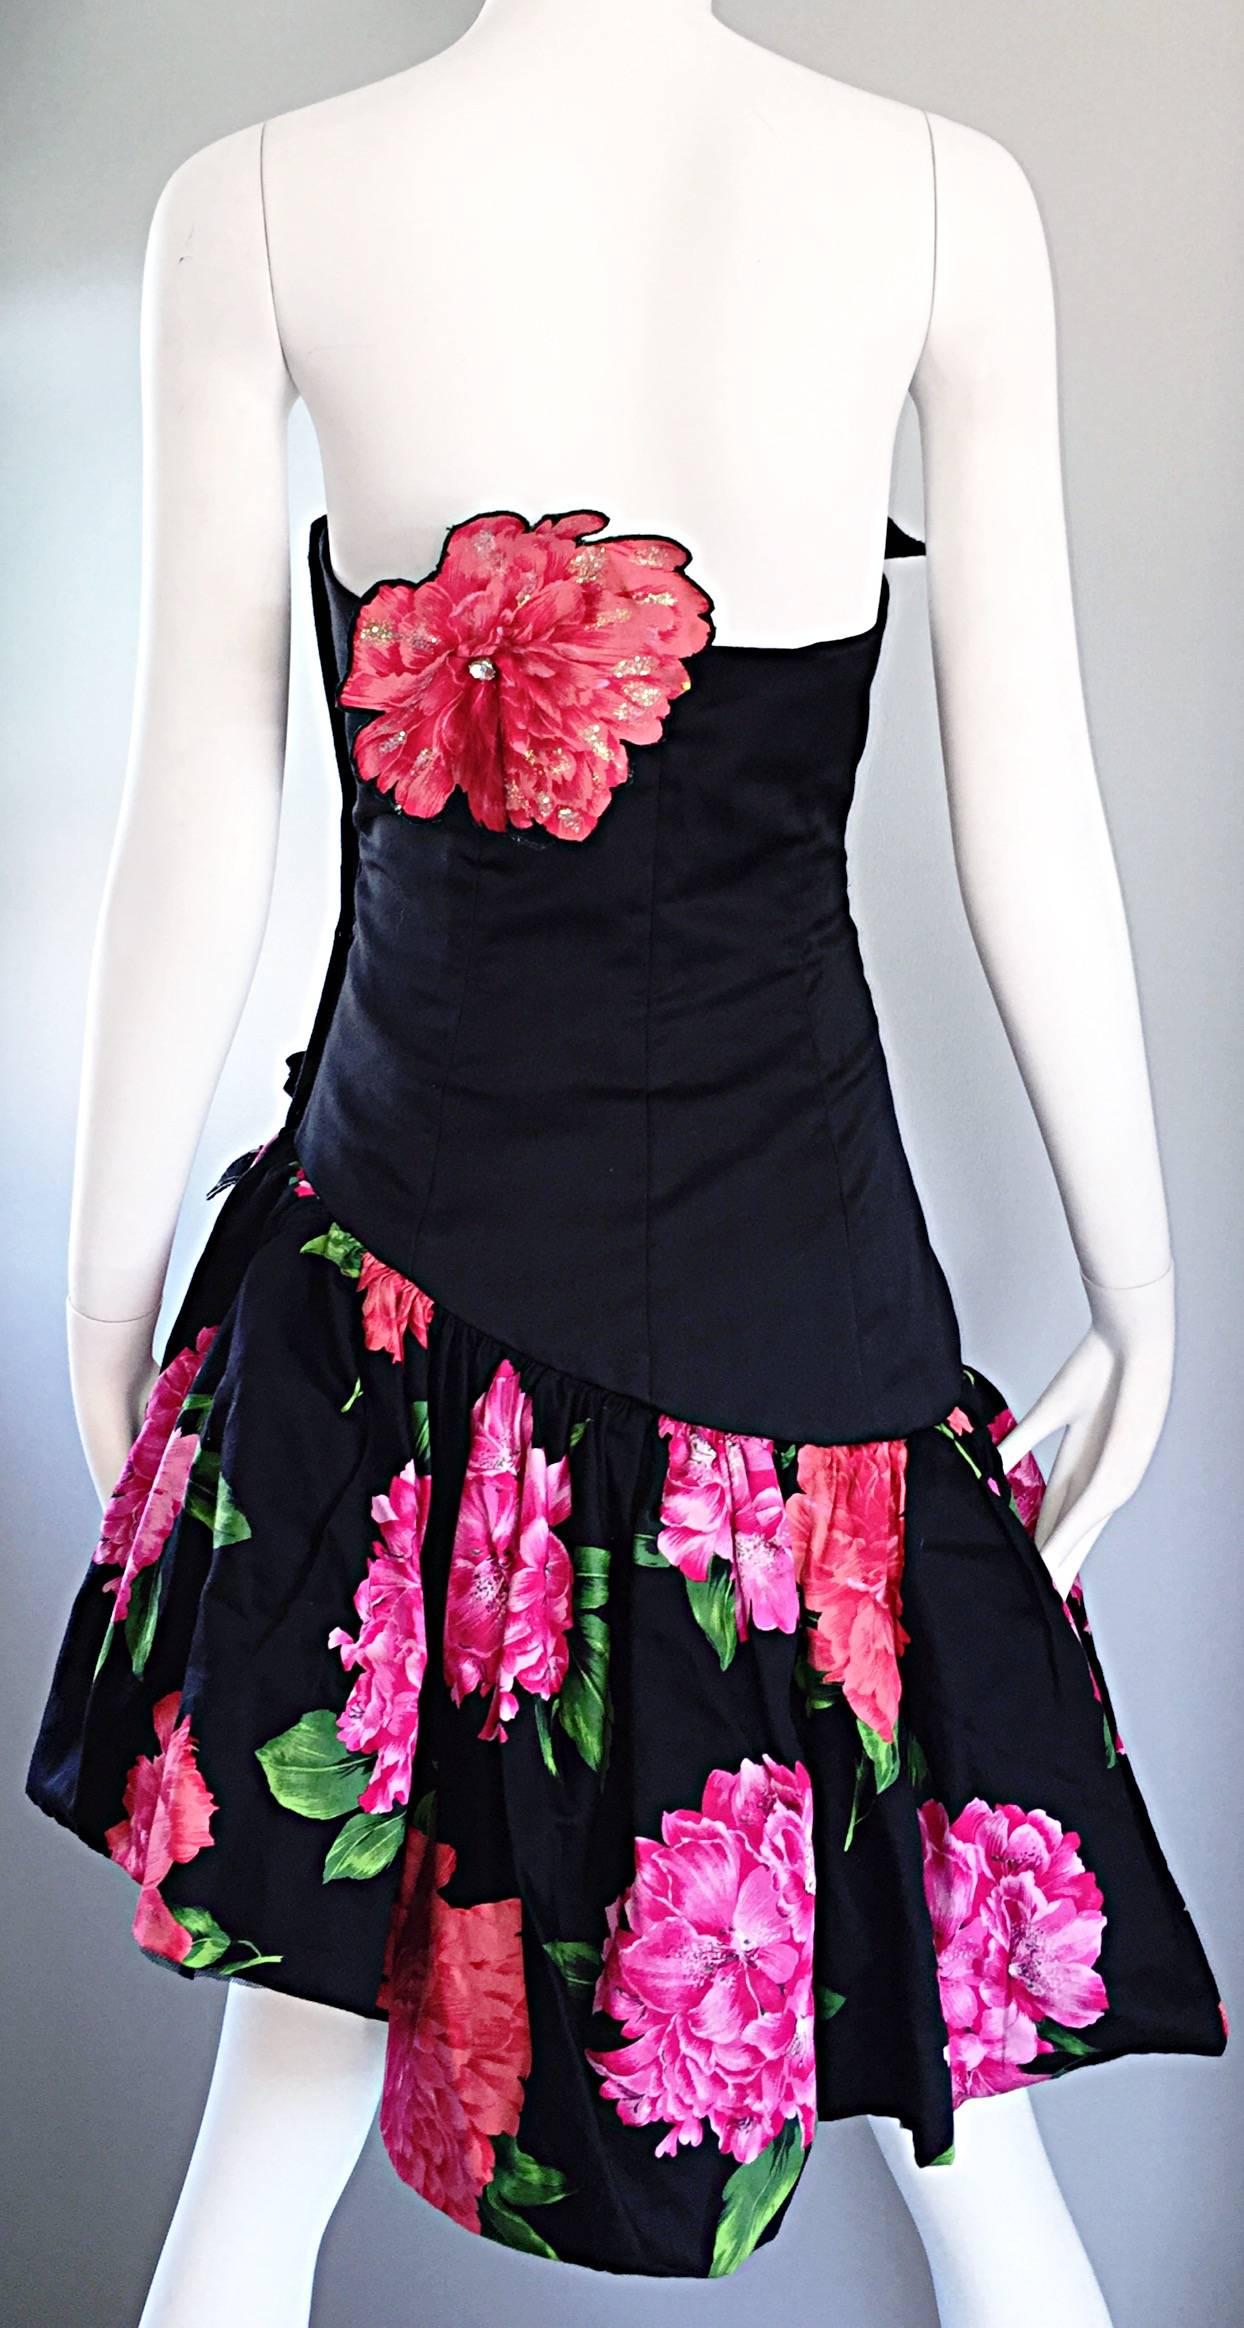 Women's Victor Costa for Saks 5th Ave Vintage 1980s Strapless Avant Garde Cocktail Dress For Sale